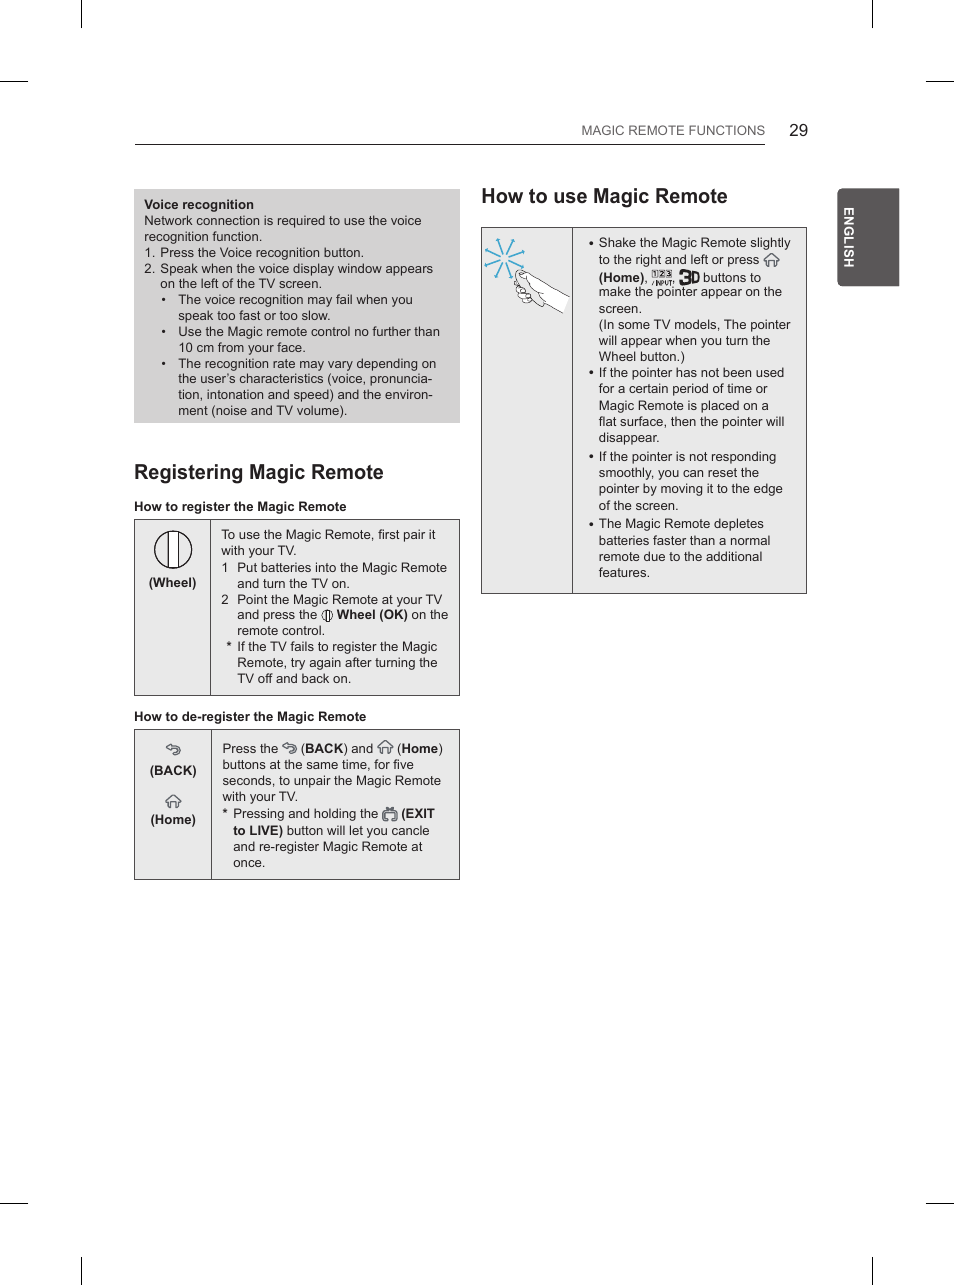 Registering magic remote, How to use magic remote | LG 84UB980V User Manual | Page 85 / 332